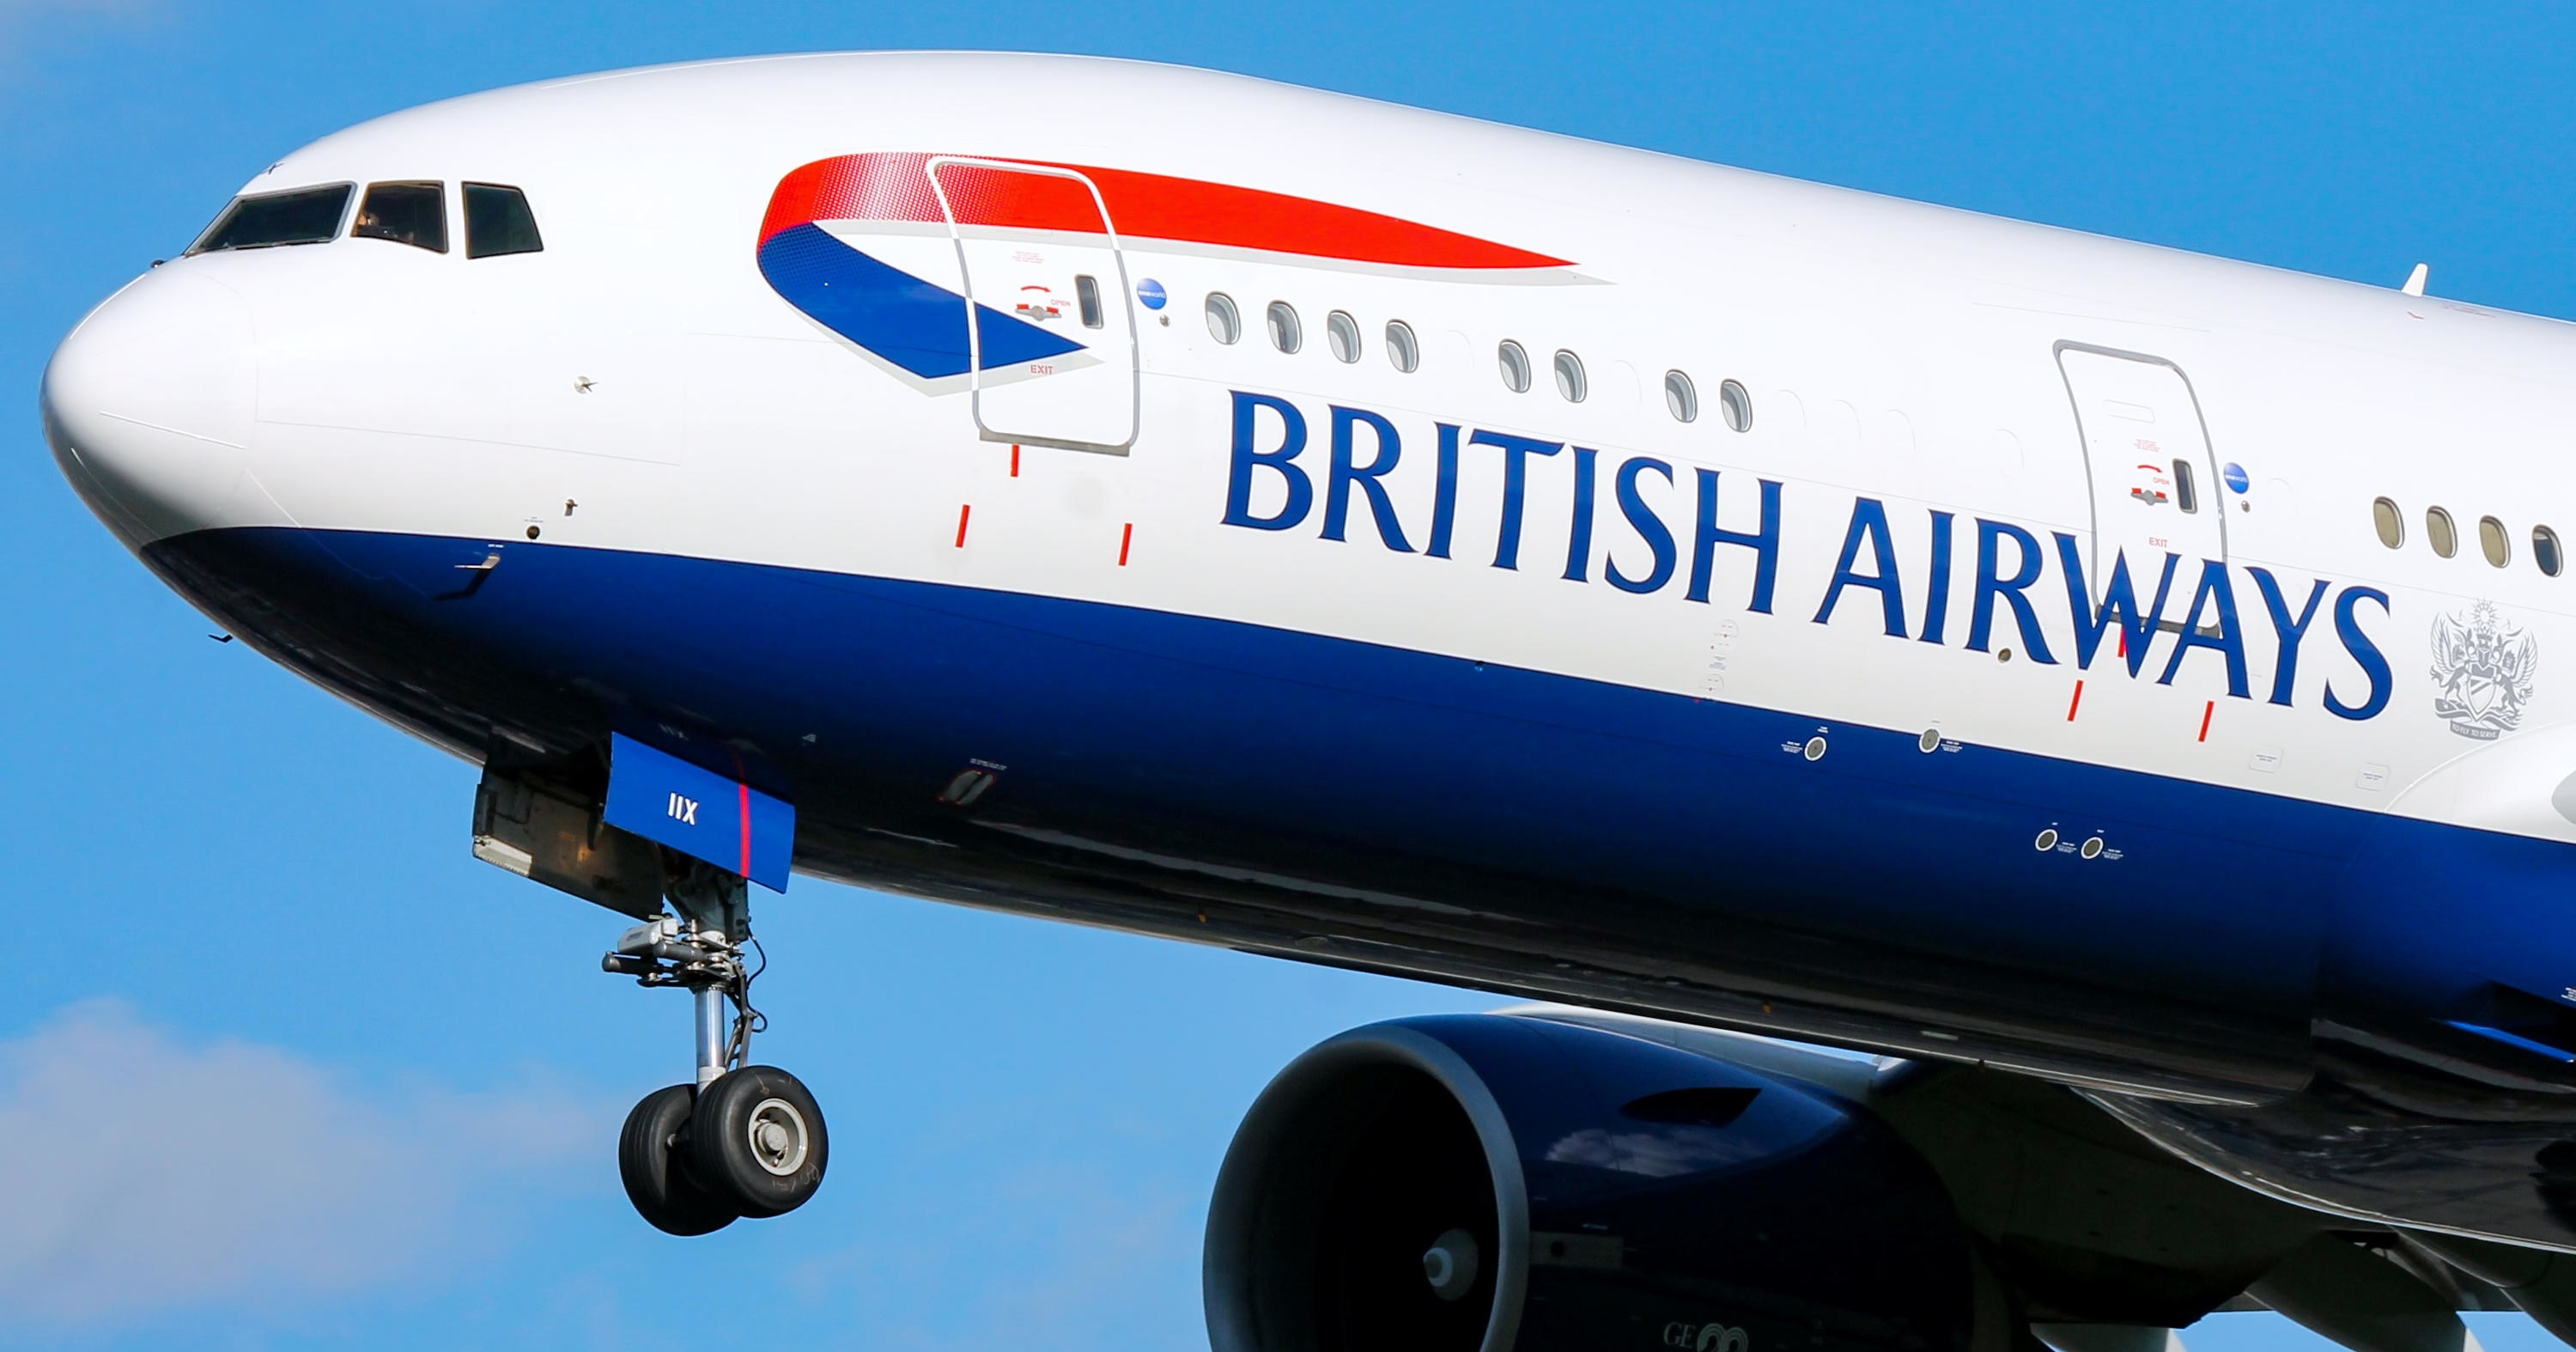 Booked A Cheap British Airways Ticket? Well, You'll Be Made To Board ...